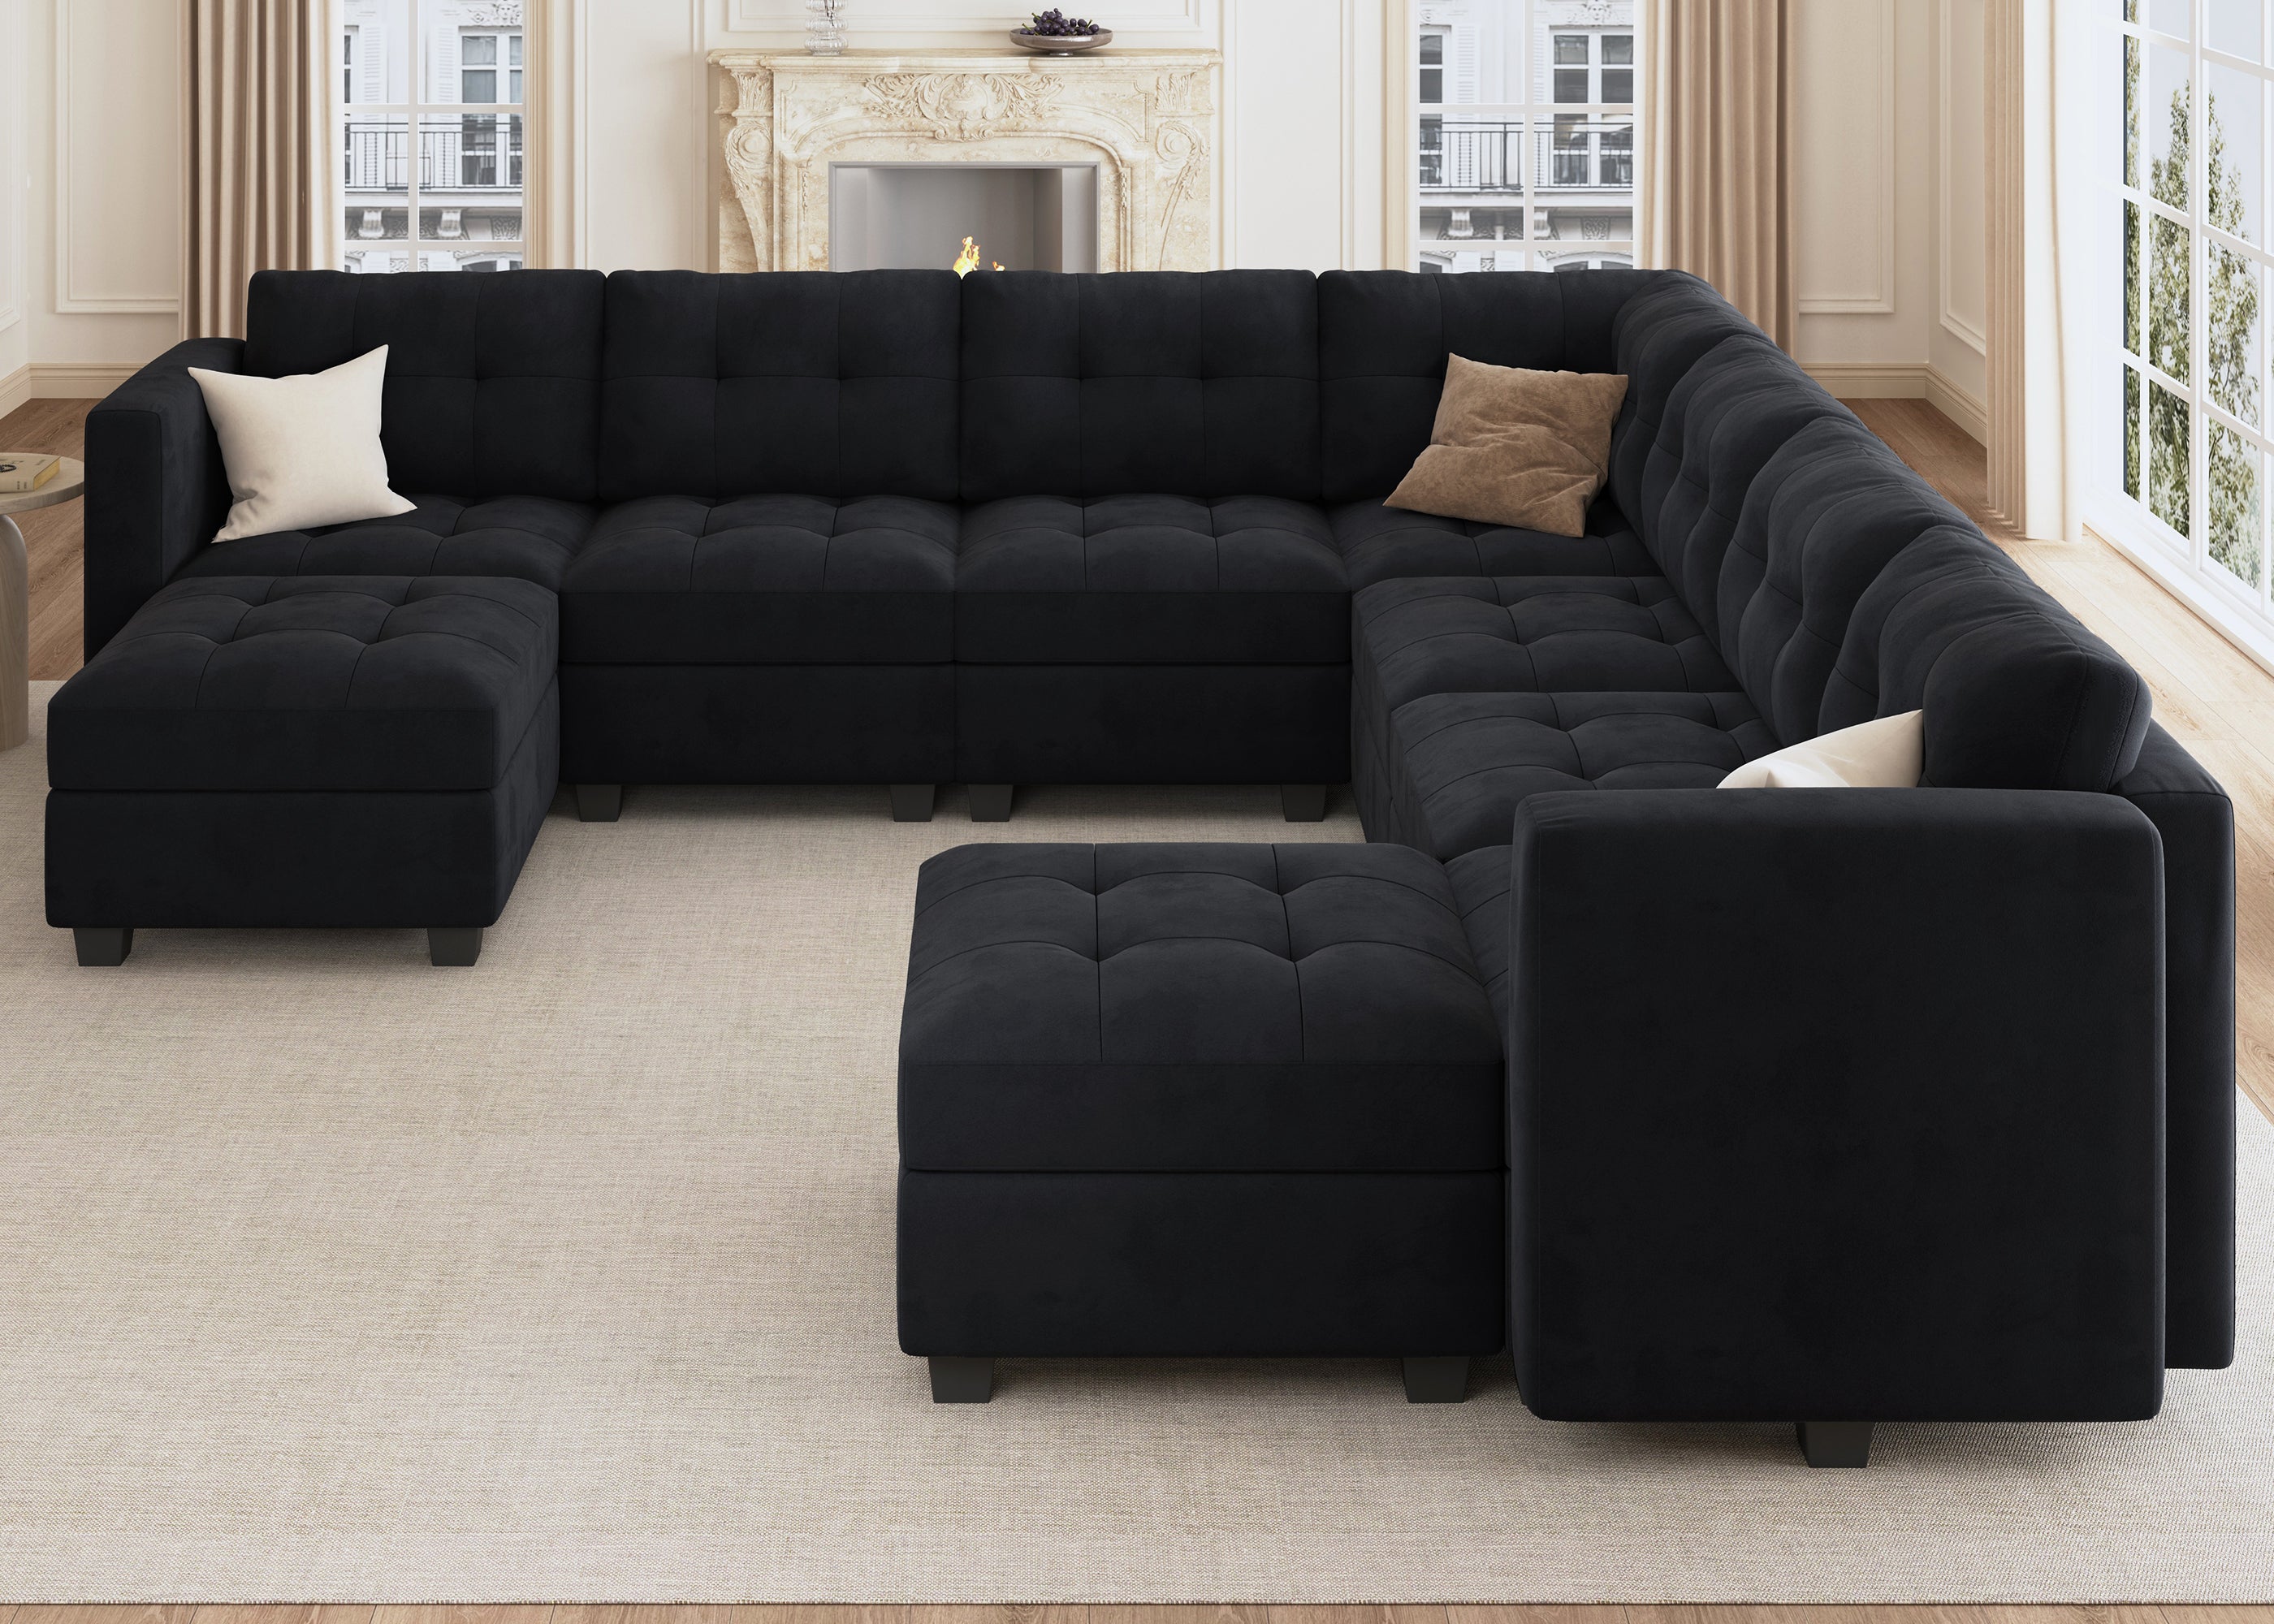 HONBAY Tufted Modular Sofa 8-Seat+1-Side Armrest+1-Ottoman with Storage Seater